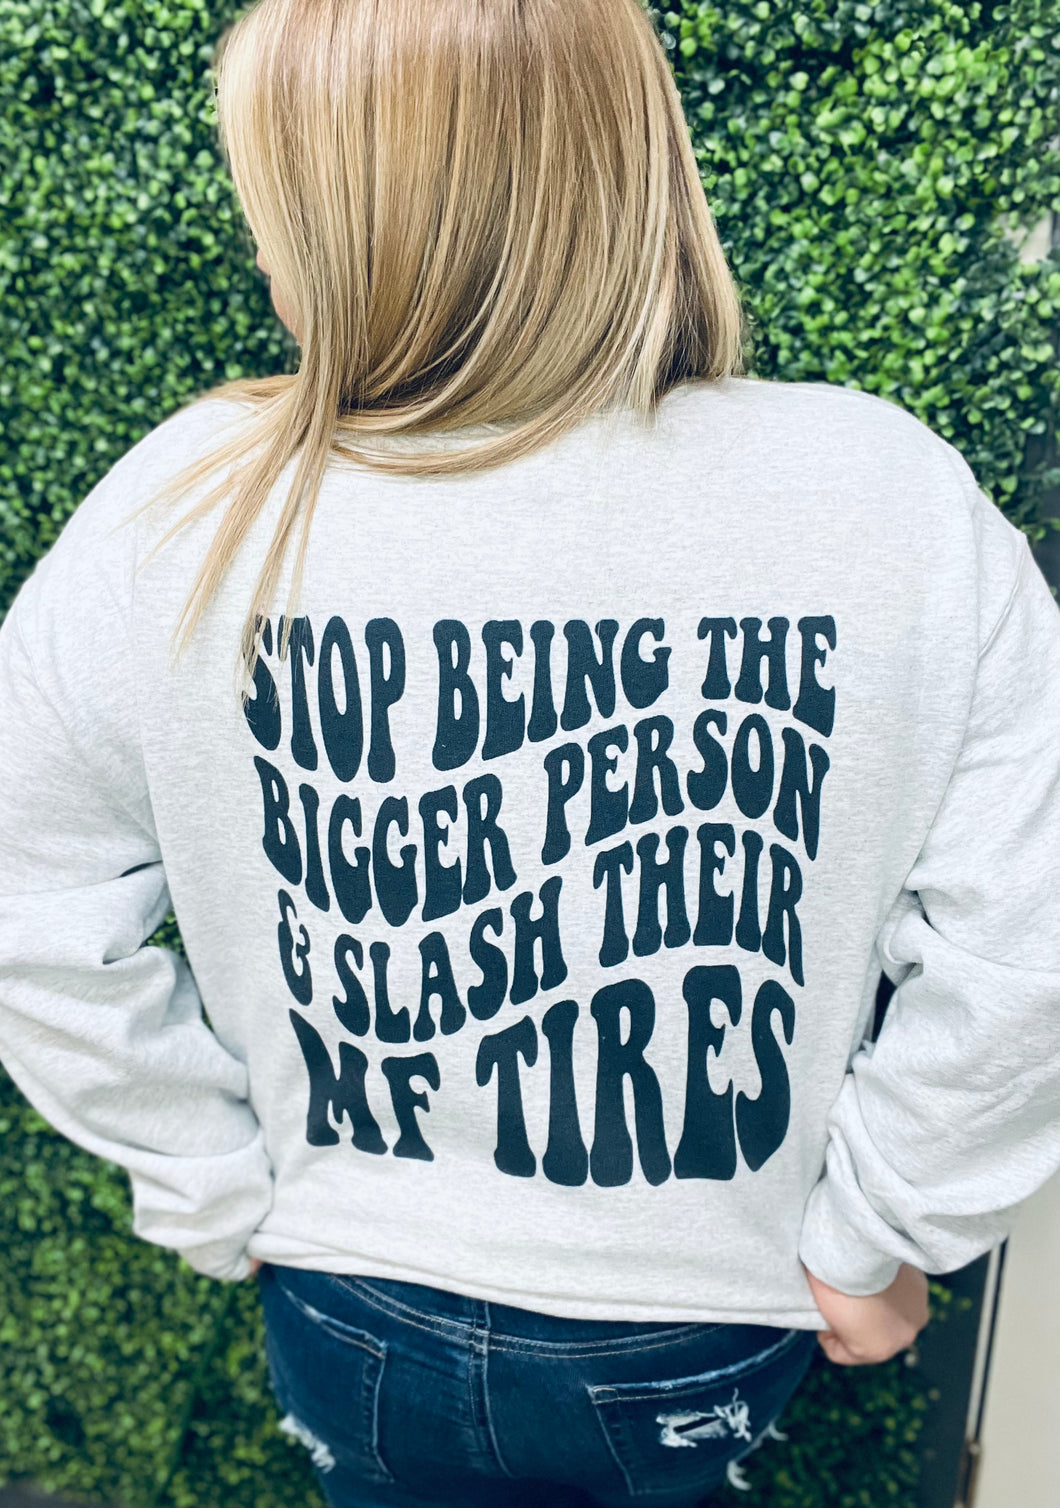 Stop being the bigger person & slash their MF tires